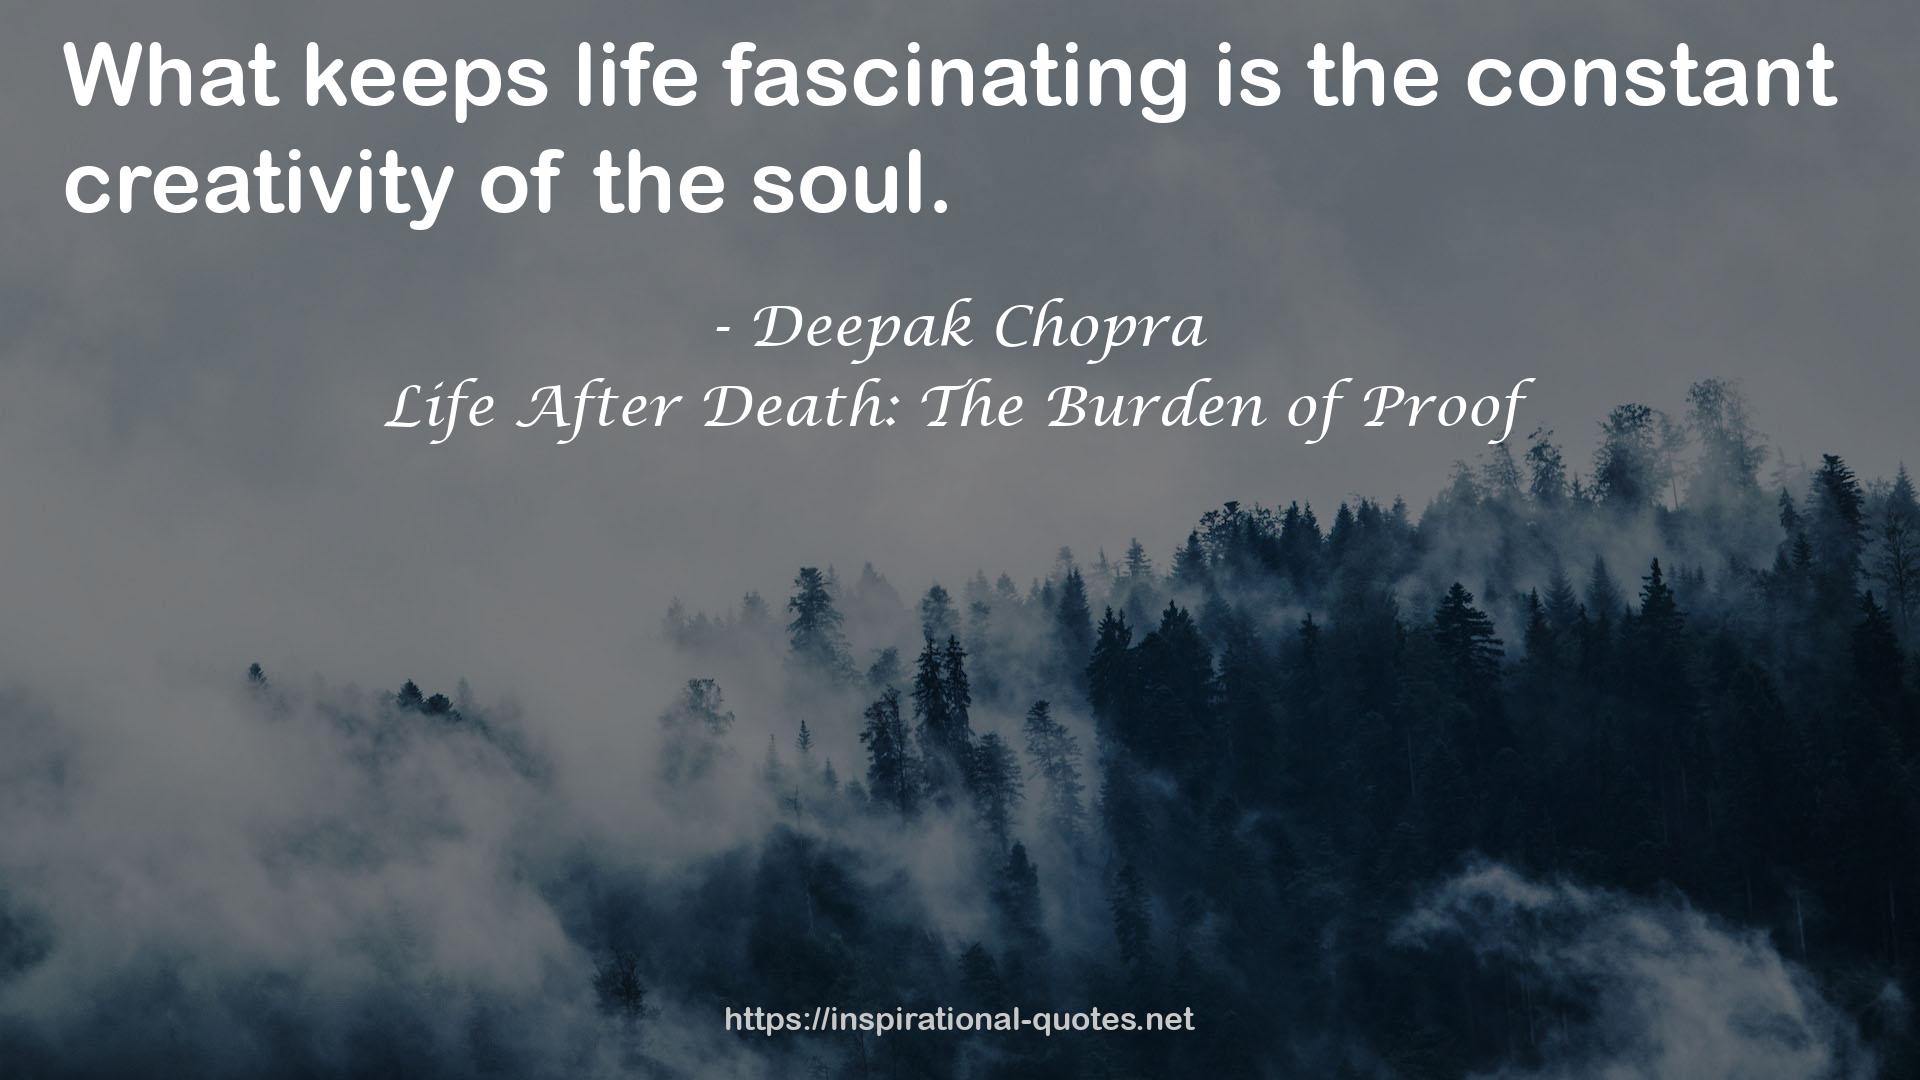 Life After Death: The Burden of Proof QUOTES